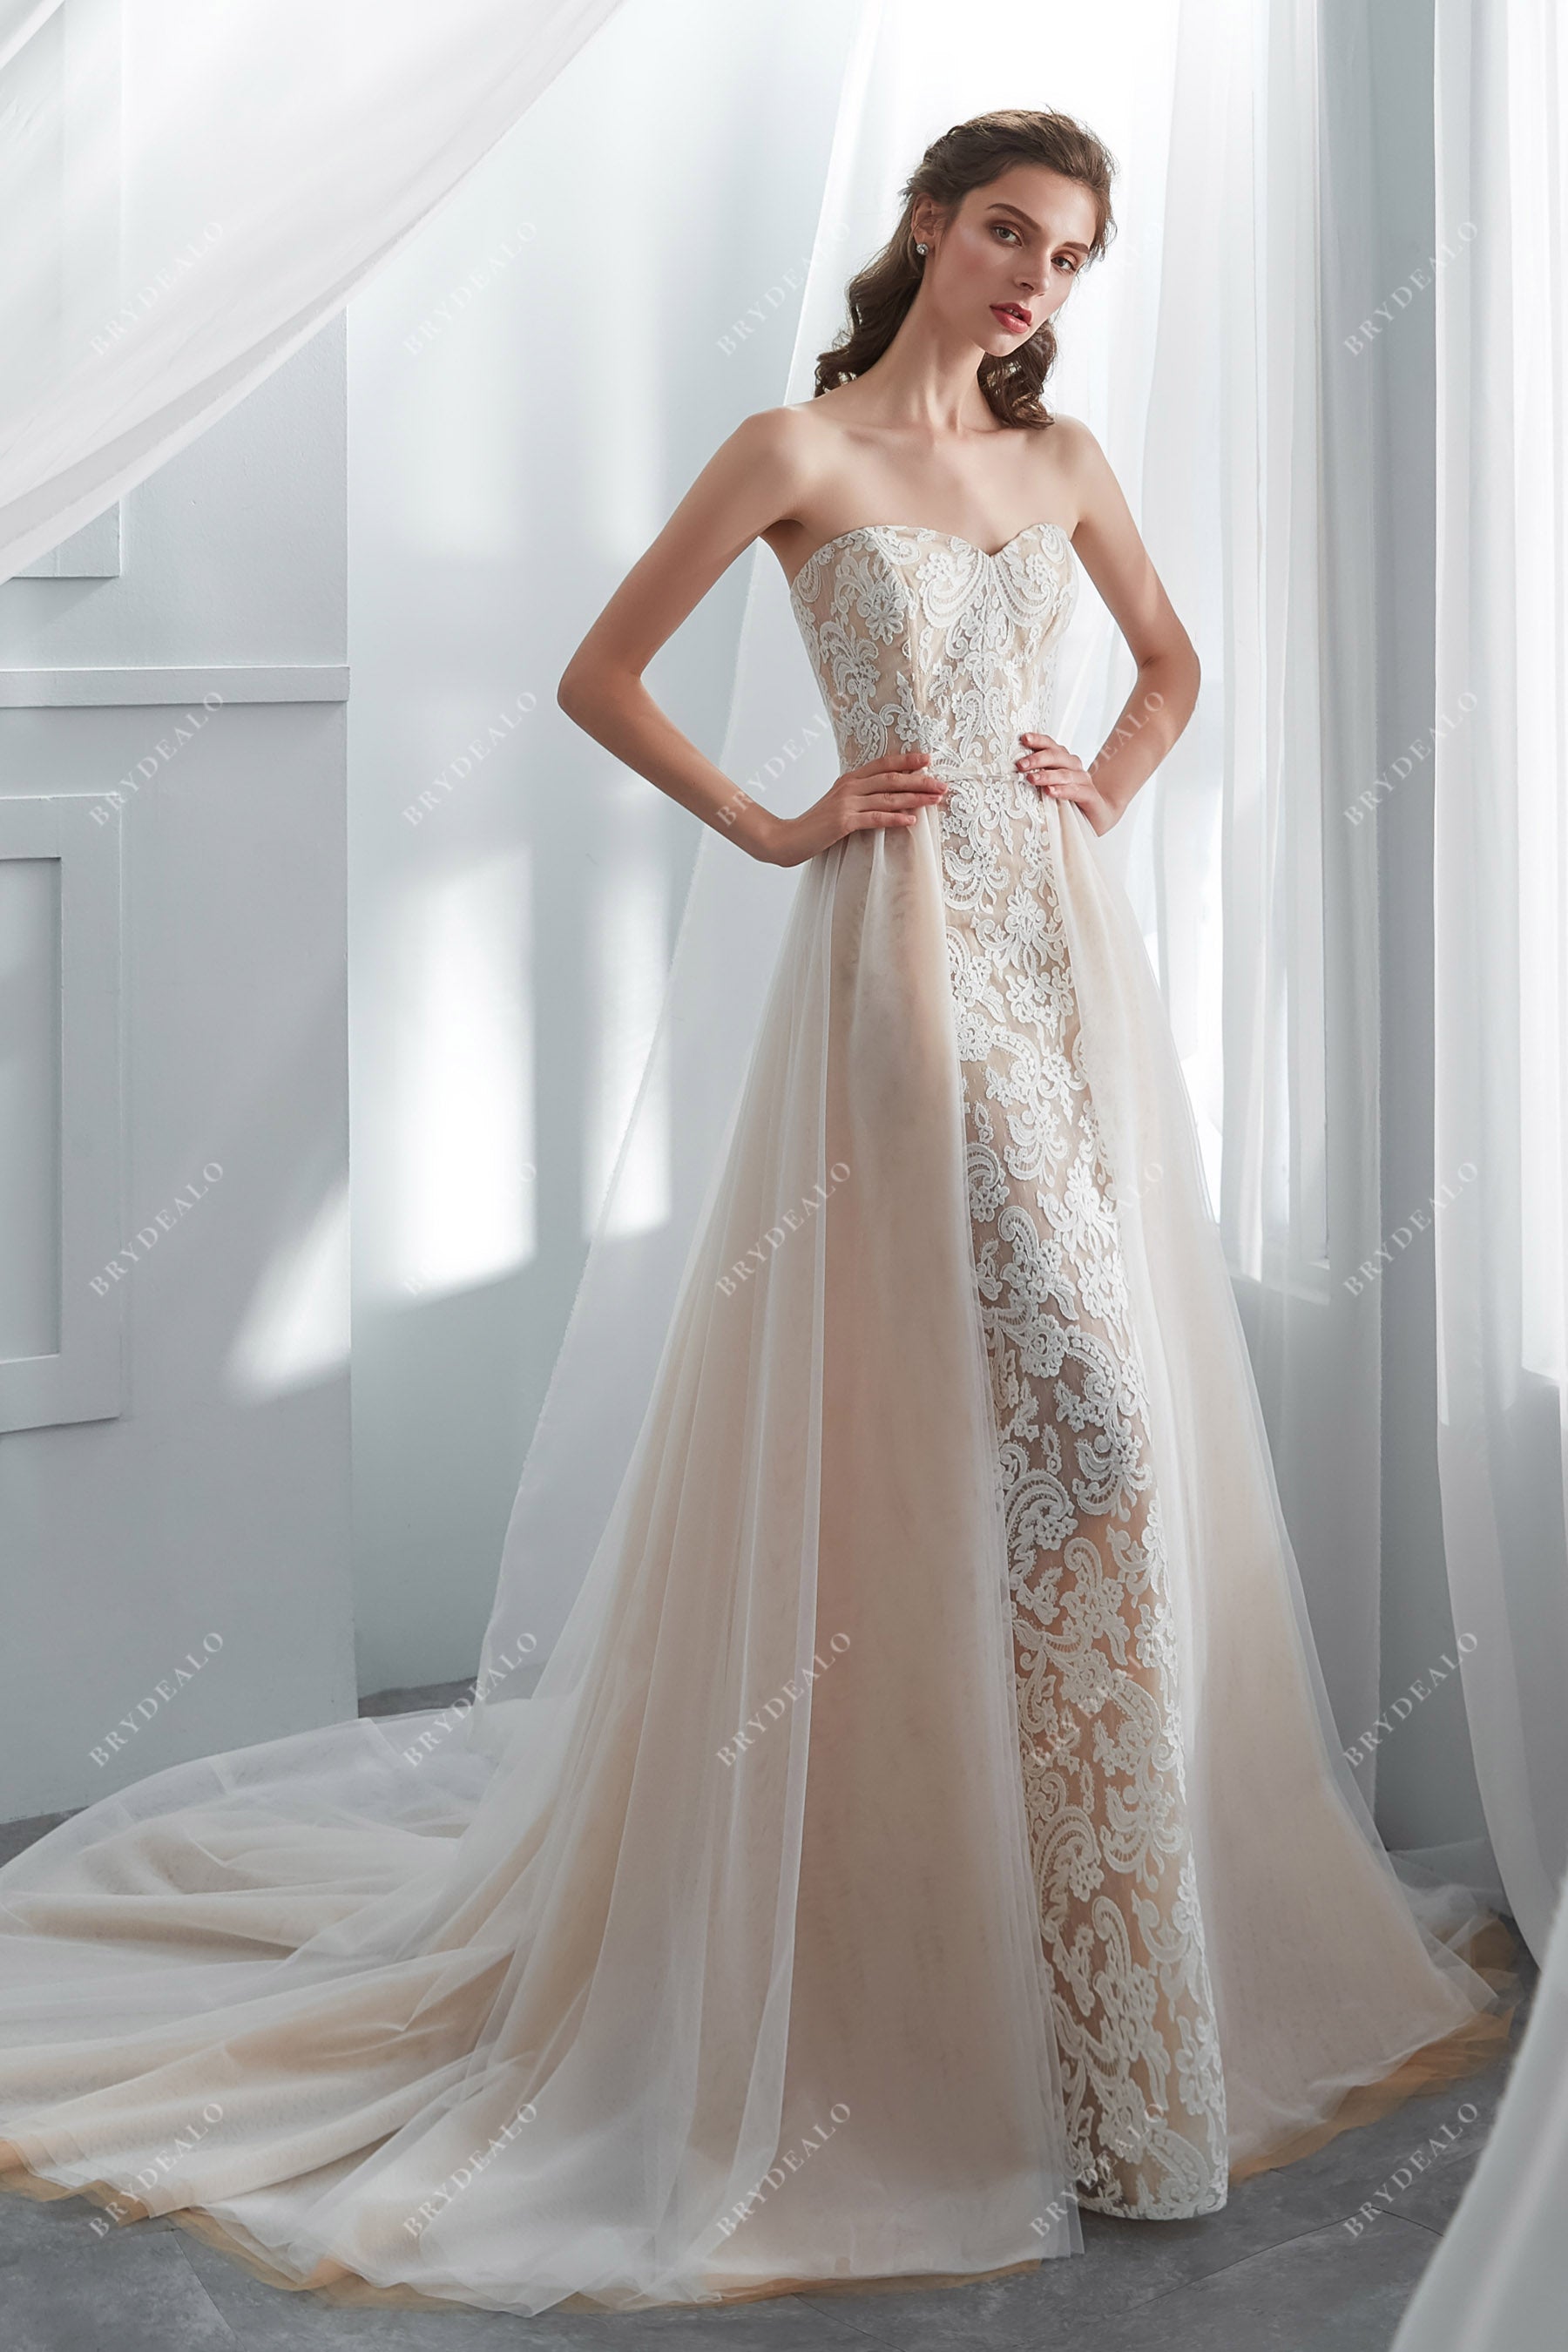 Designer Lace Tulle Overskirt Wedding Gown